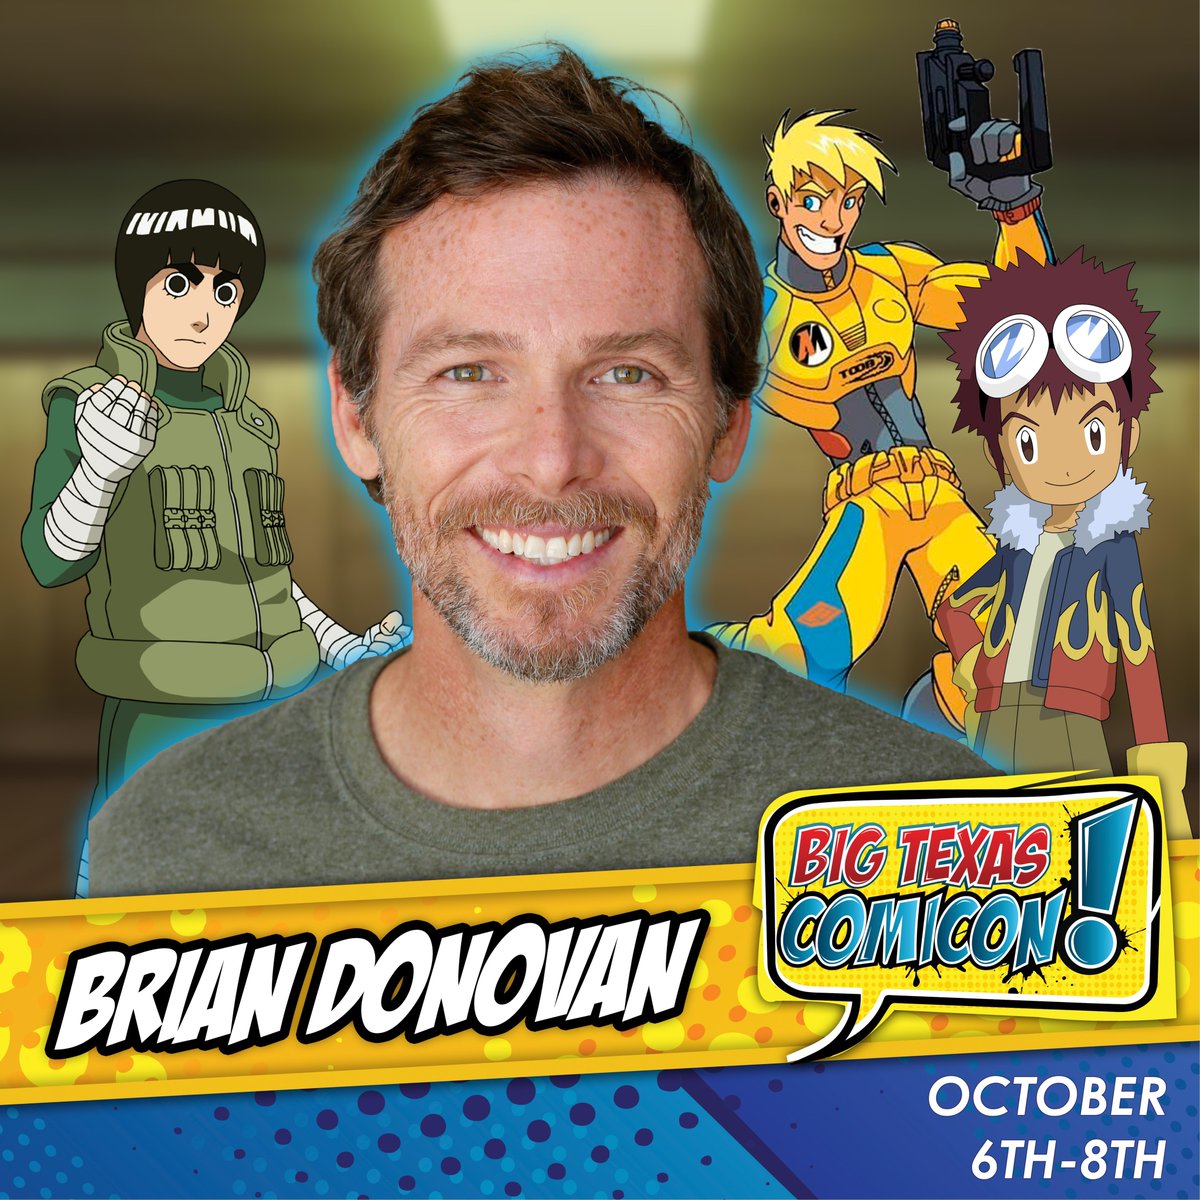 Welcome Brock Lee himself, Brian Donovan to Big Texas Comicon 2023!

Tickets available at bigtexascomicon.com/tickets